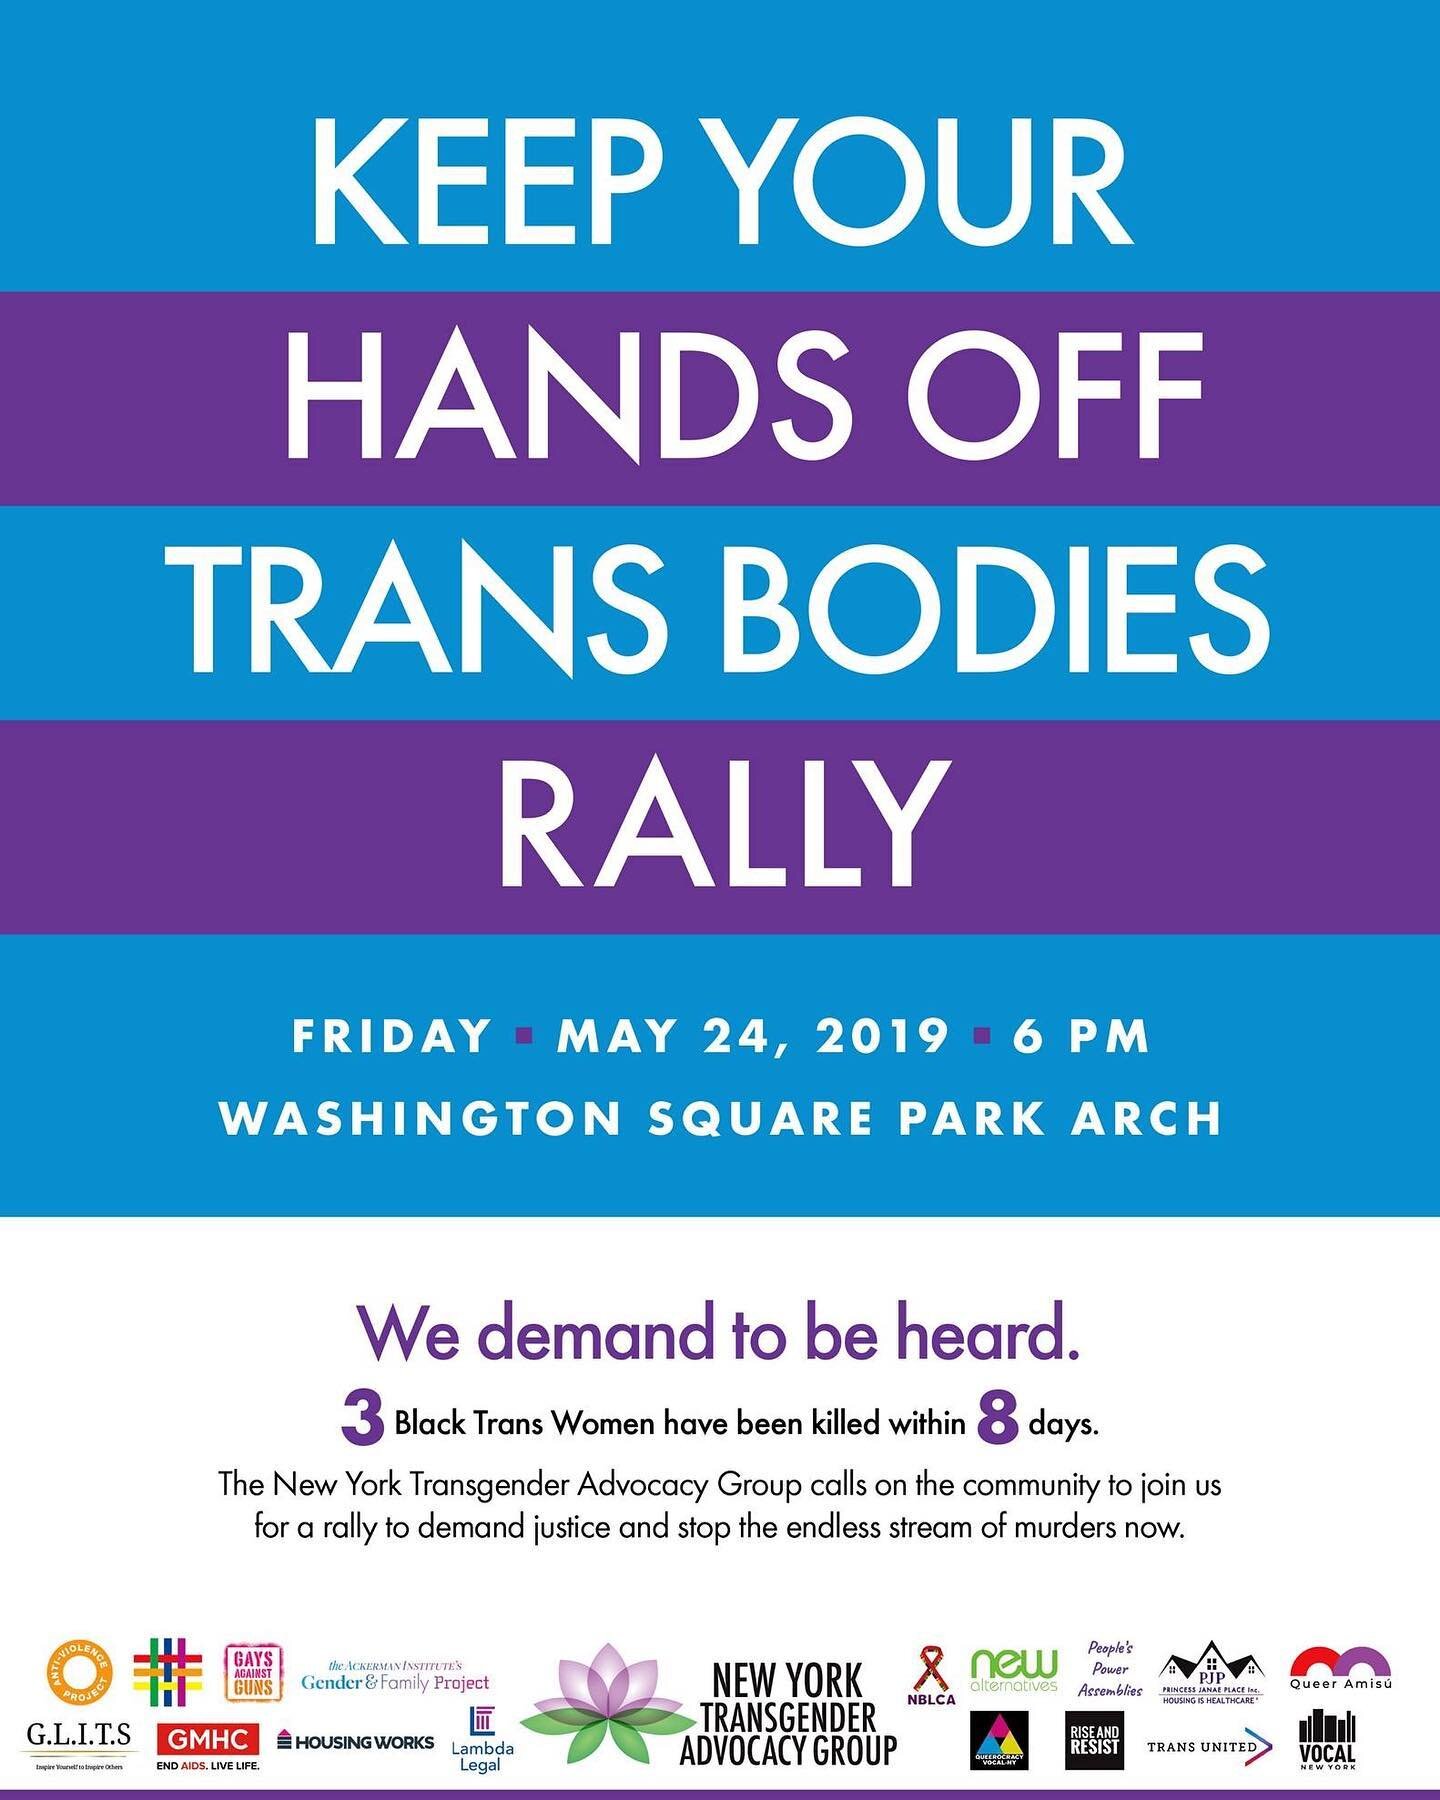 ‪The New York Transgender Advocacy Group (NYTAG) is holding a rally tomorrow in Washington Square Park @ 6PM in response to the recent trans murders. Our lab is attending and we encourage you to do so as well. ‬ #TransRightsAreHumanRights #TransLives